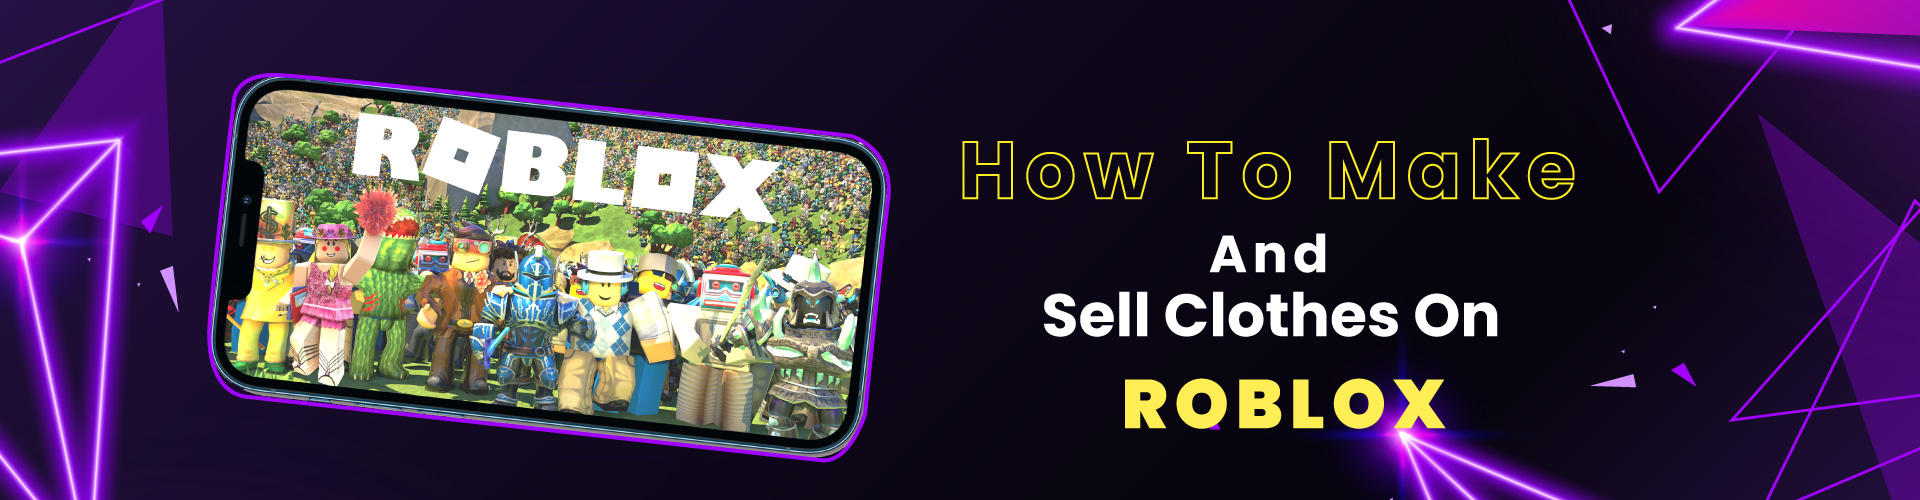 How To Make And Sell Clothes On ROBLOX